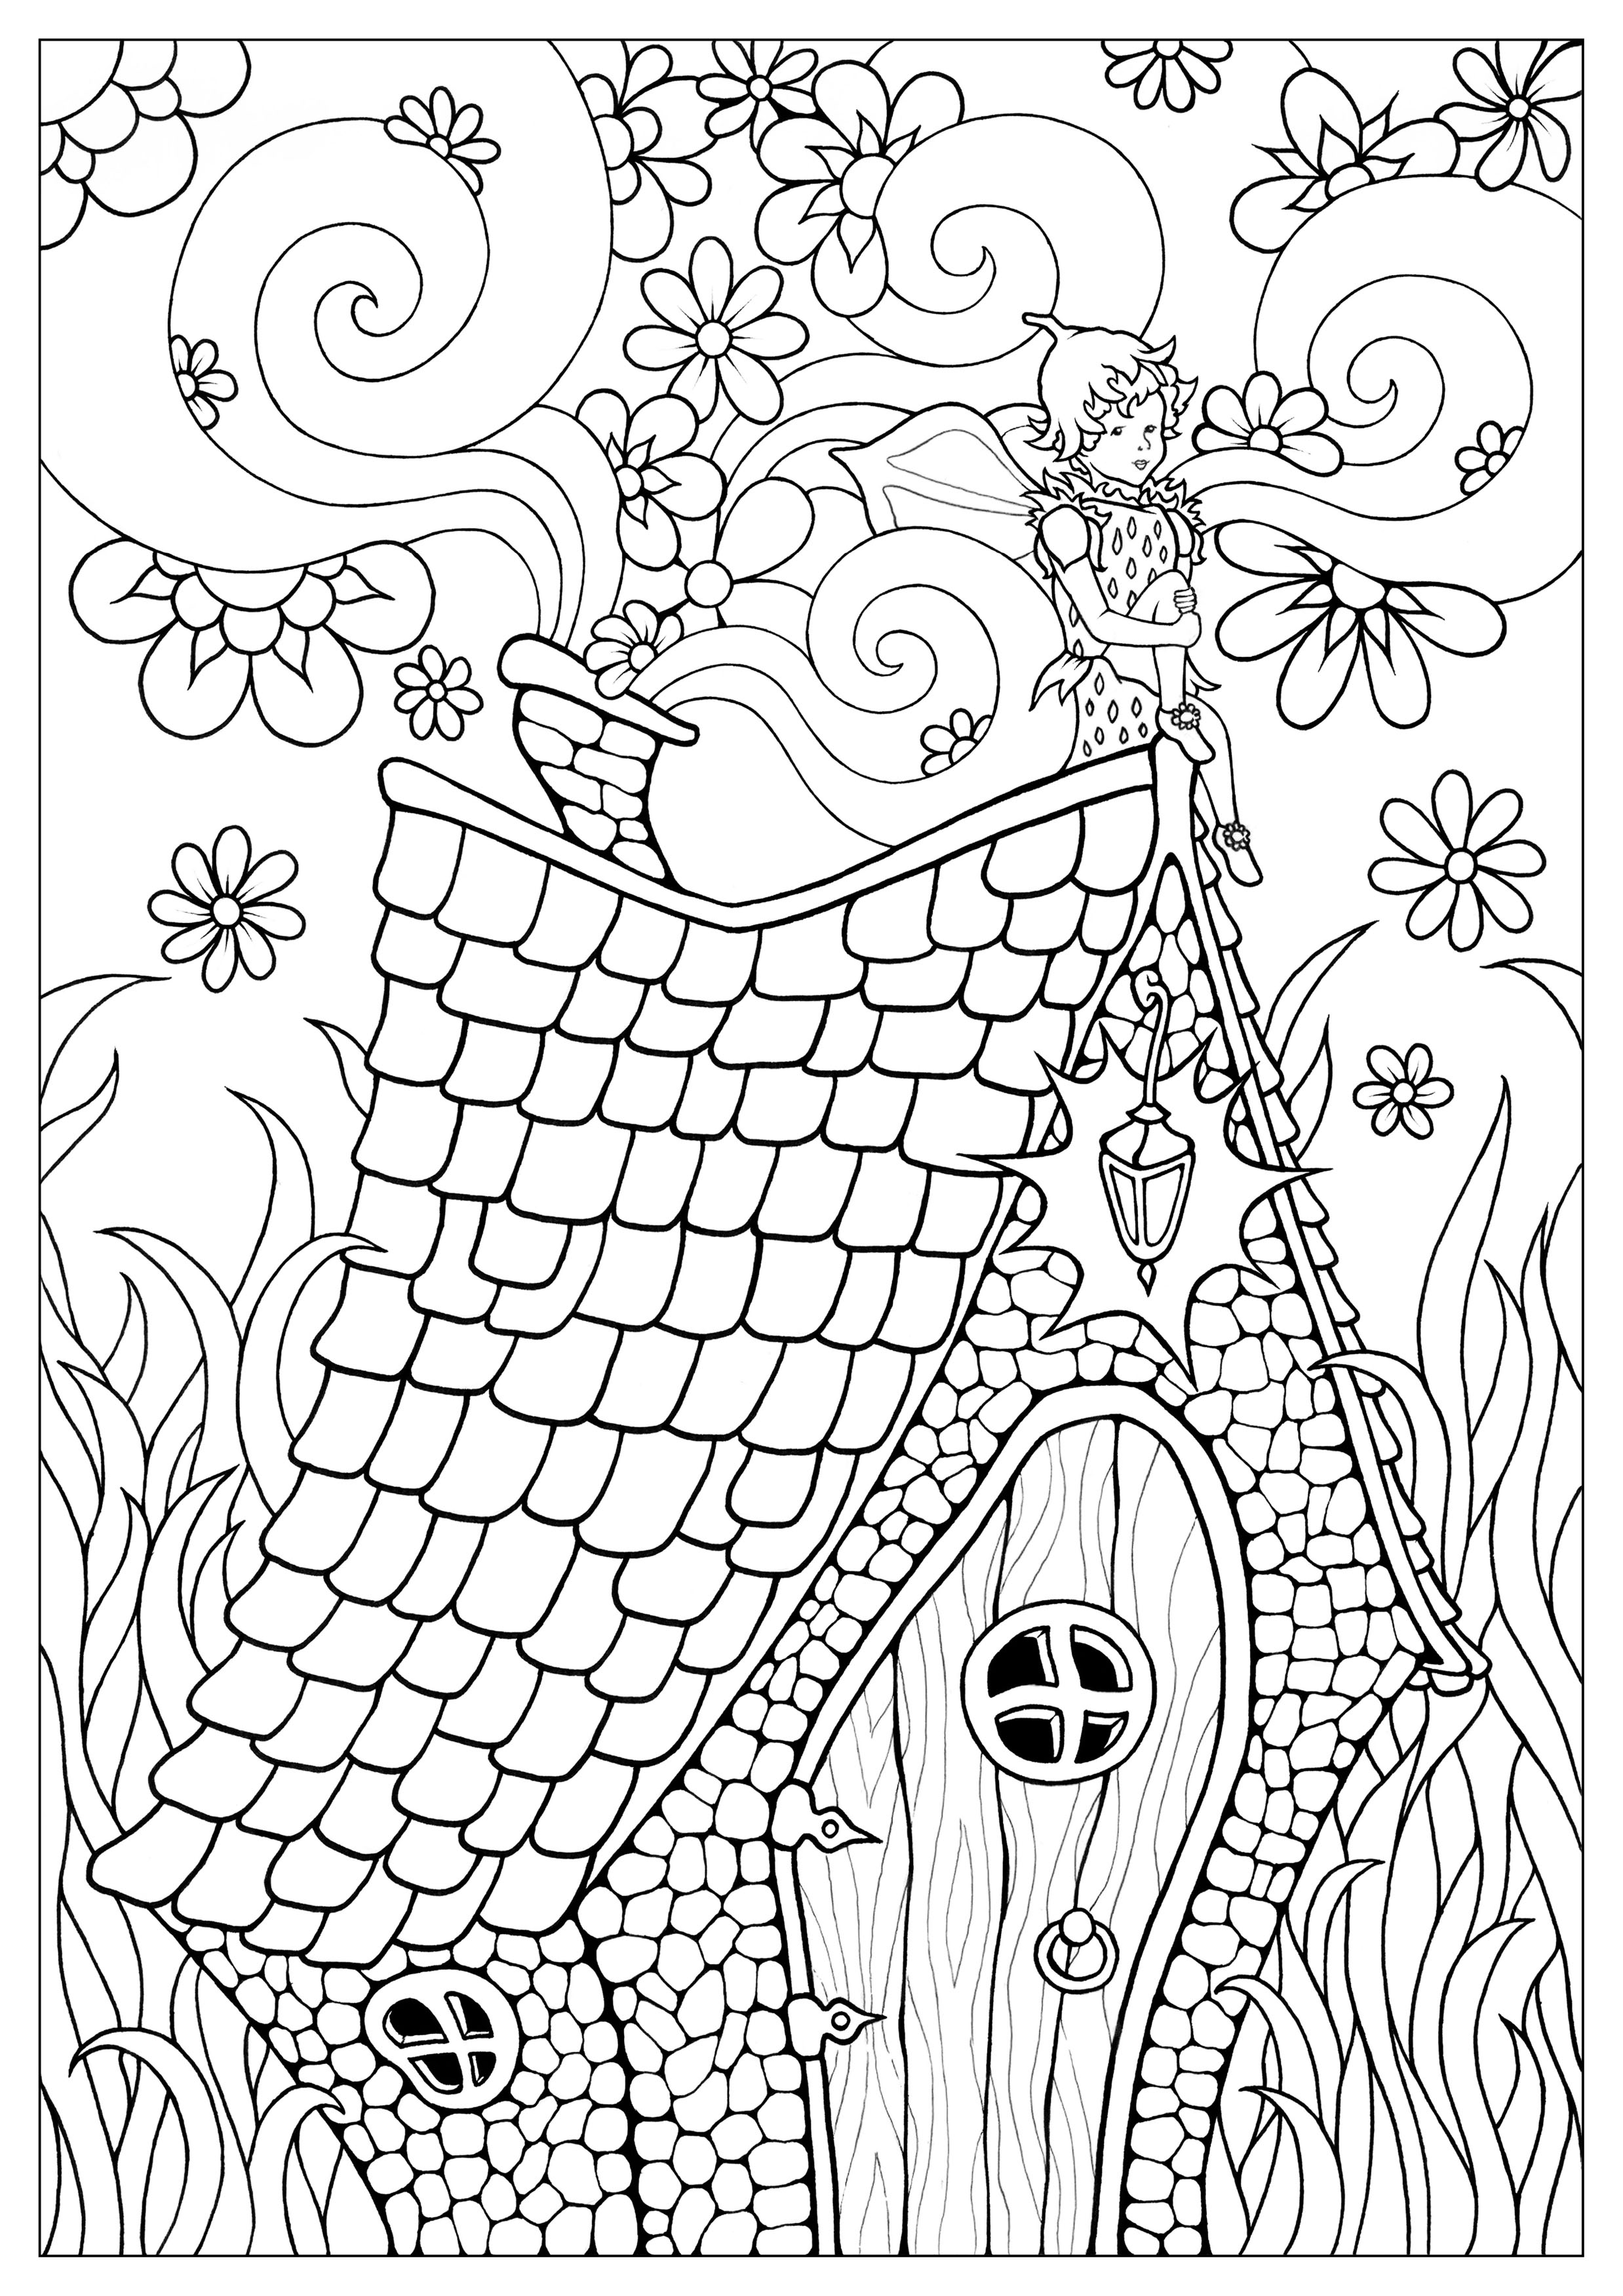 15+ fairy tale castle coloring pages for adults Fairy tale castle ...